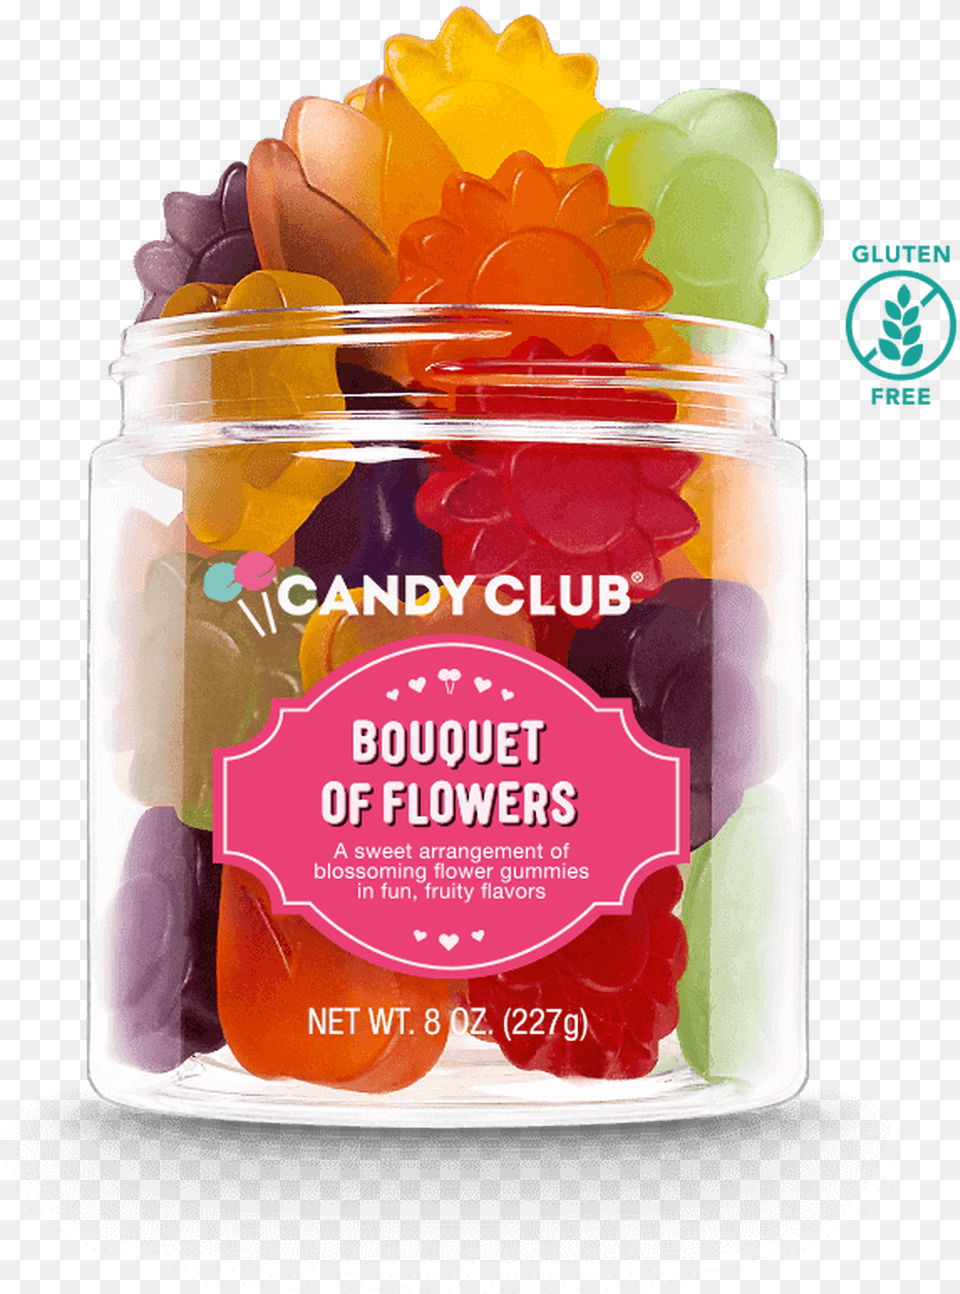 A Cup Of Bouquet Of Flowers Candy Flower Bouquet, Food, Jar, Jelly, Ketchup Png